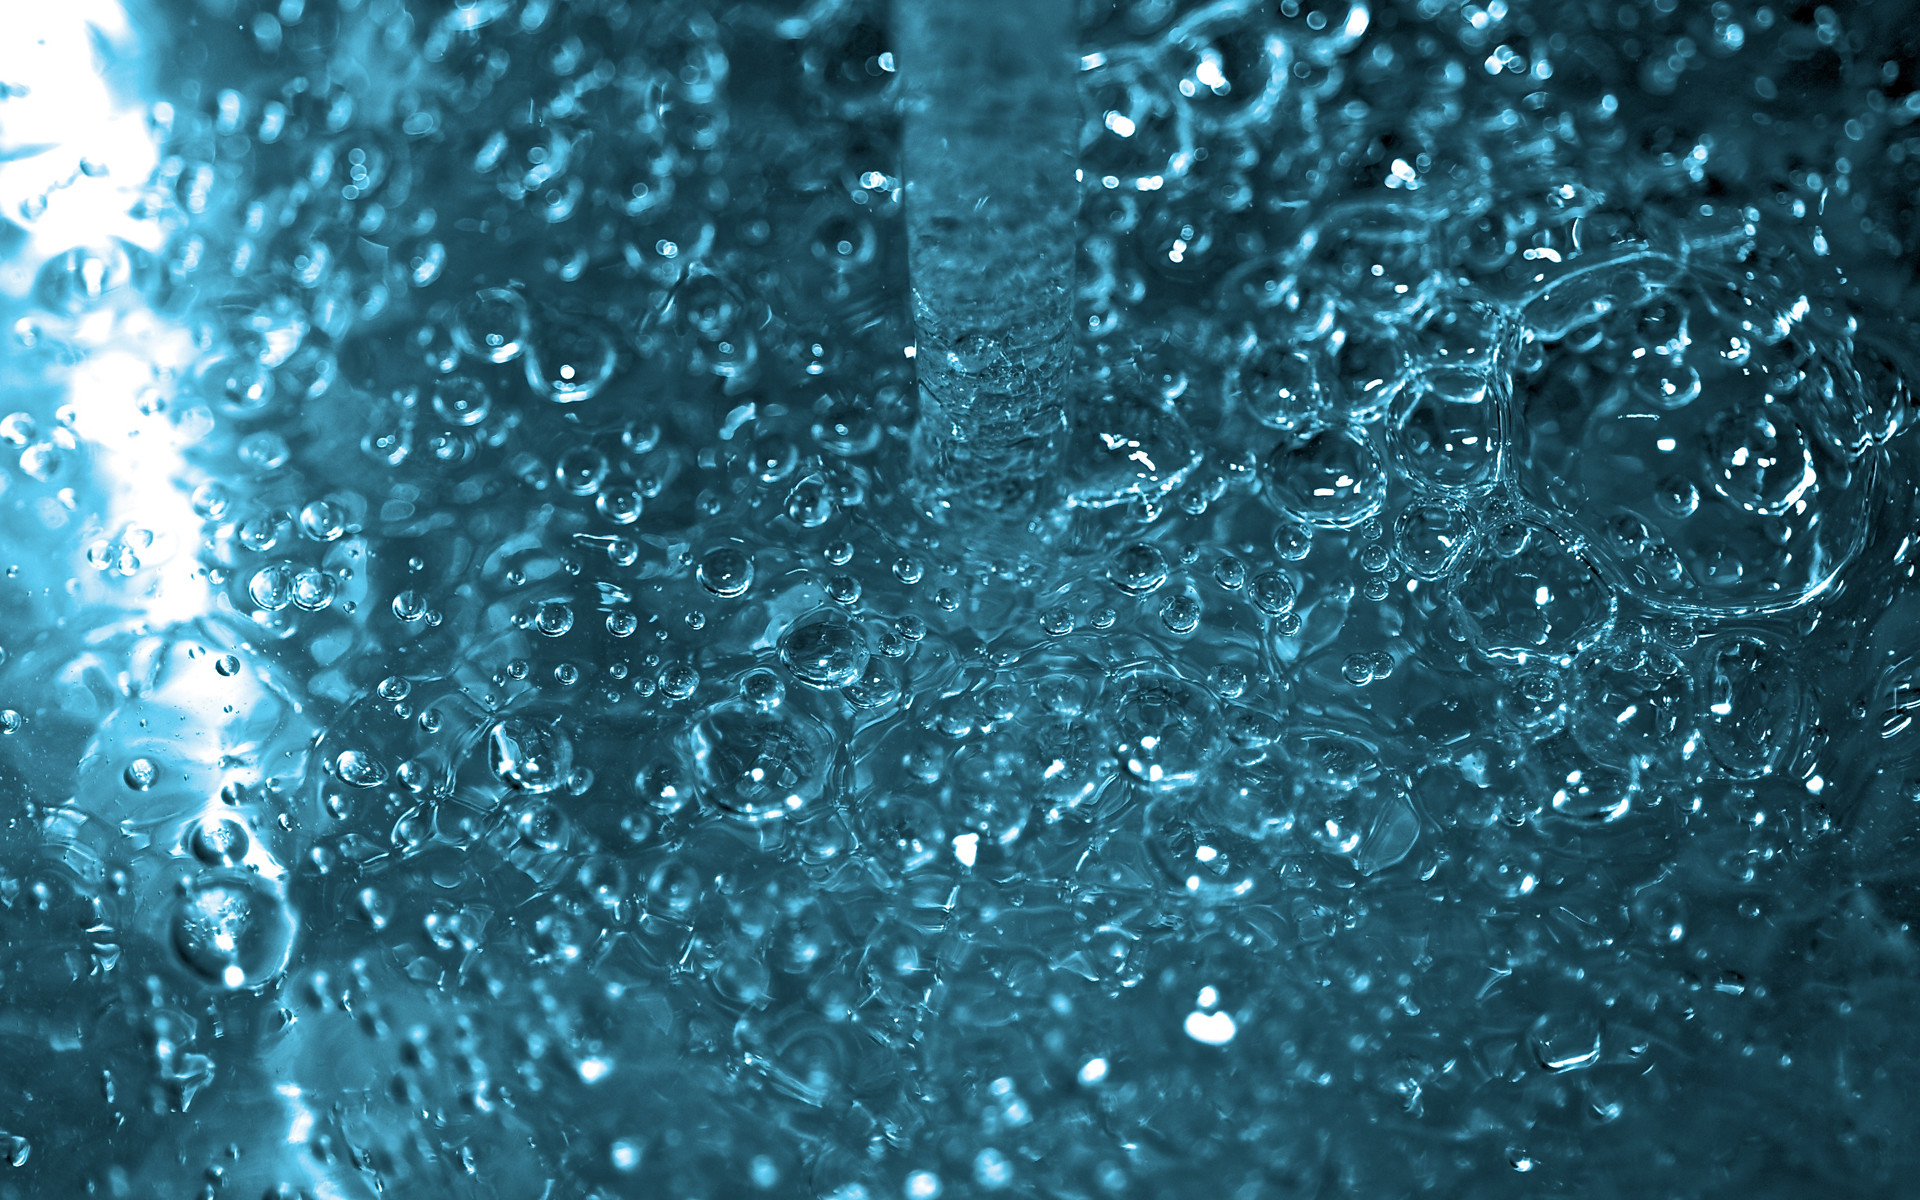 1920x1200 Water Droplets Wallpaper - http://wallpaperzoo.com/water-droplets-